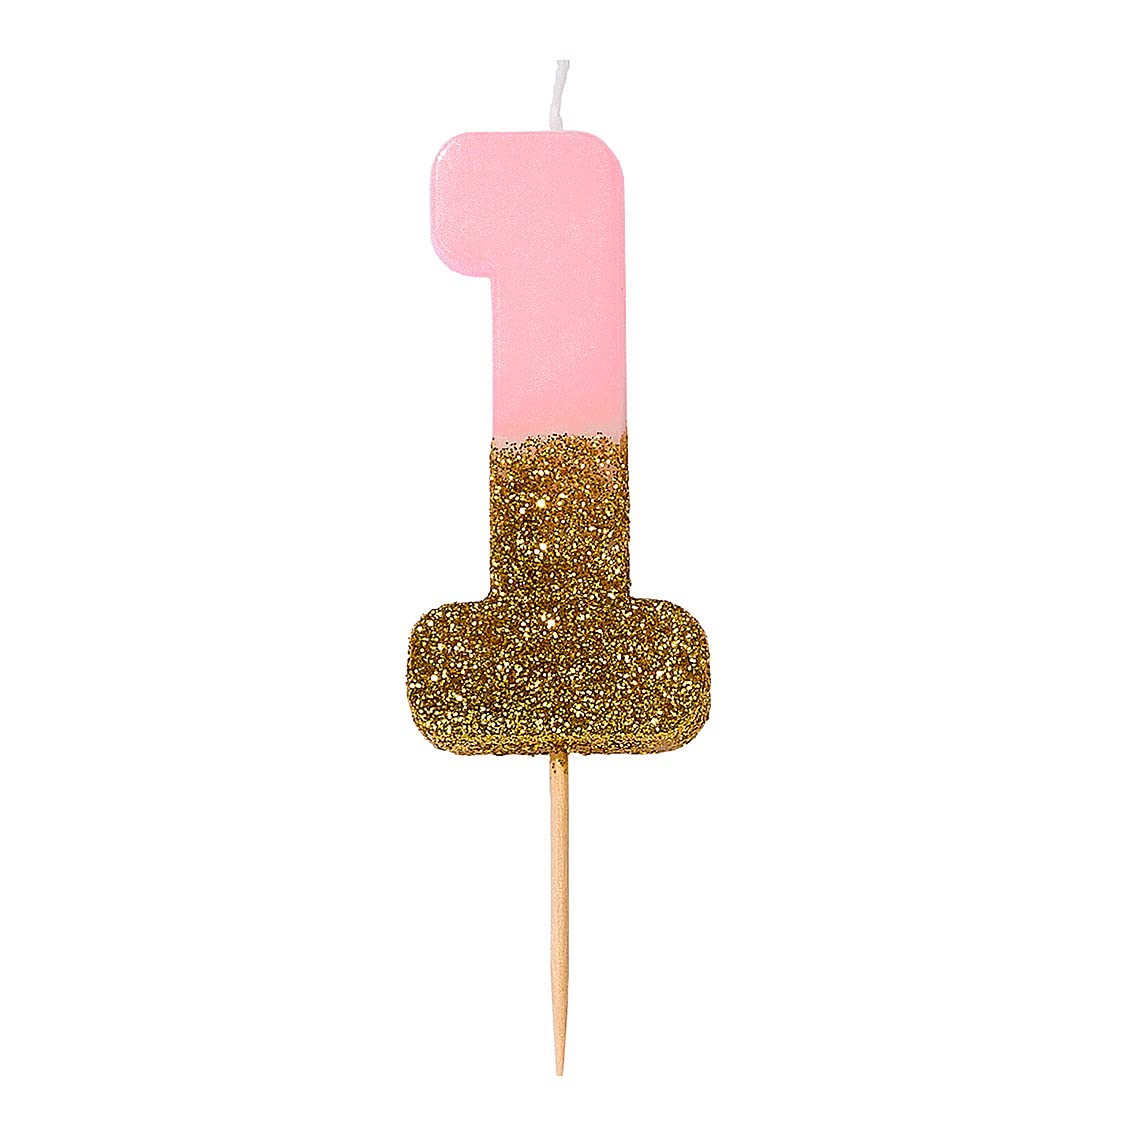 Happy Birthday Candle Cake Toppers – Bling Your Cake